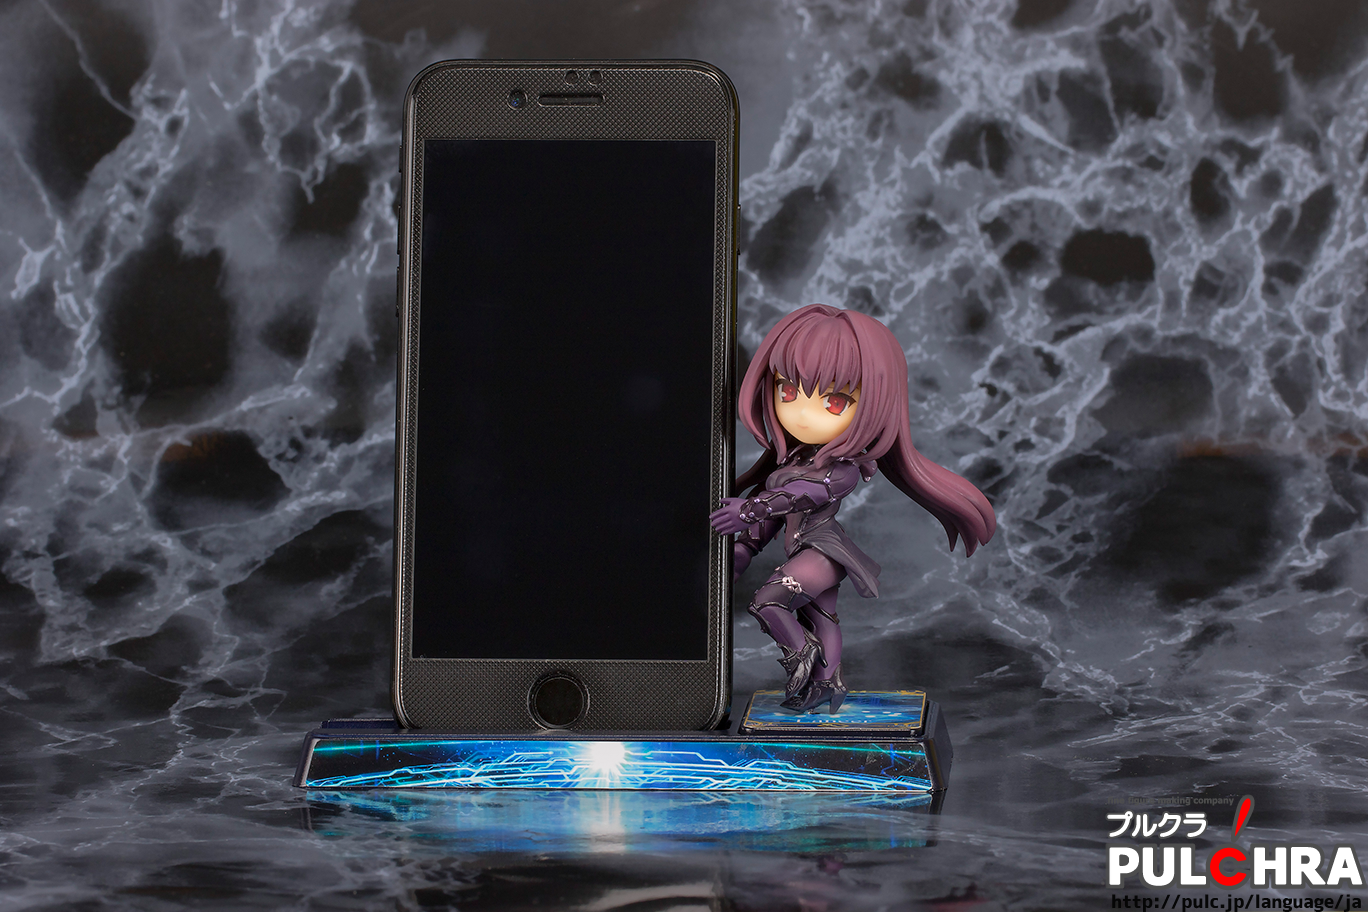 goodie - Lancer/Scathach - Smartphone Stand Bishoujo Character Collection - Pulchra